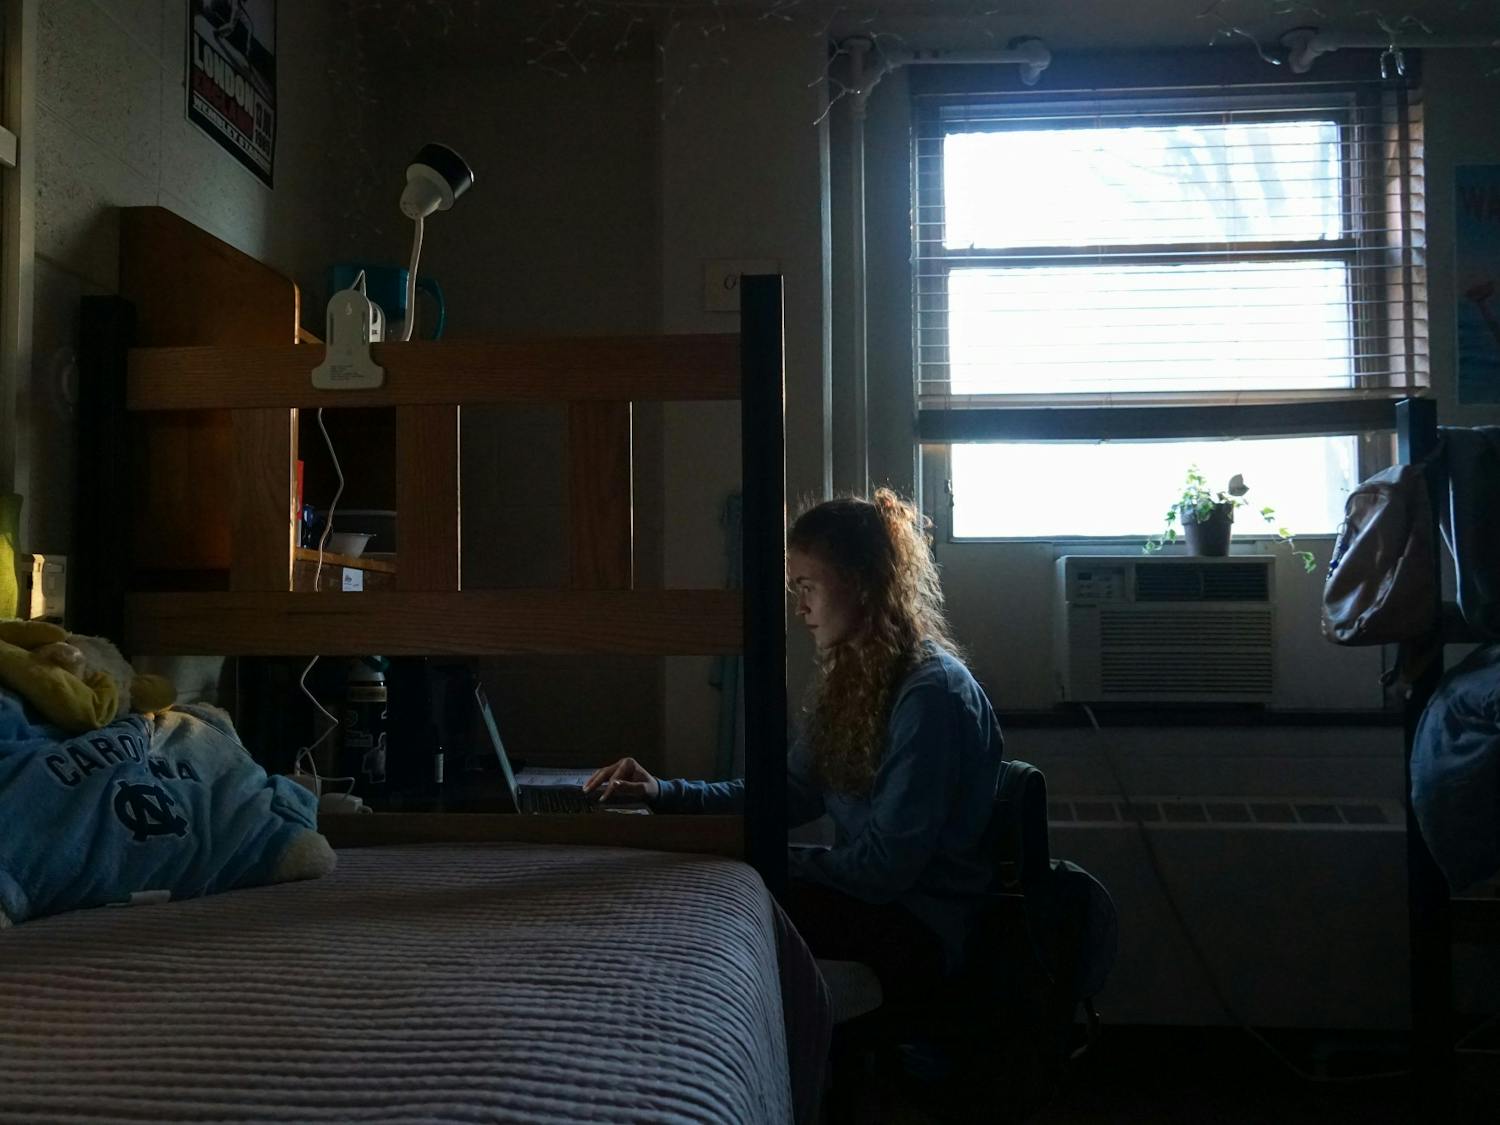 Alexandra Zubrowicz, first-year student and Contemporary European Studies major regularly attends zoom class within her Ehringhaus dorm room. Virtual learning has confined many freshmen to their residence halls and limited their educational environment.